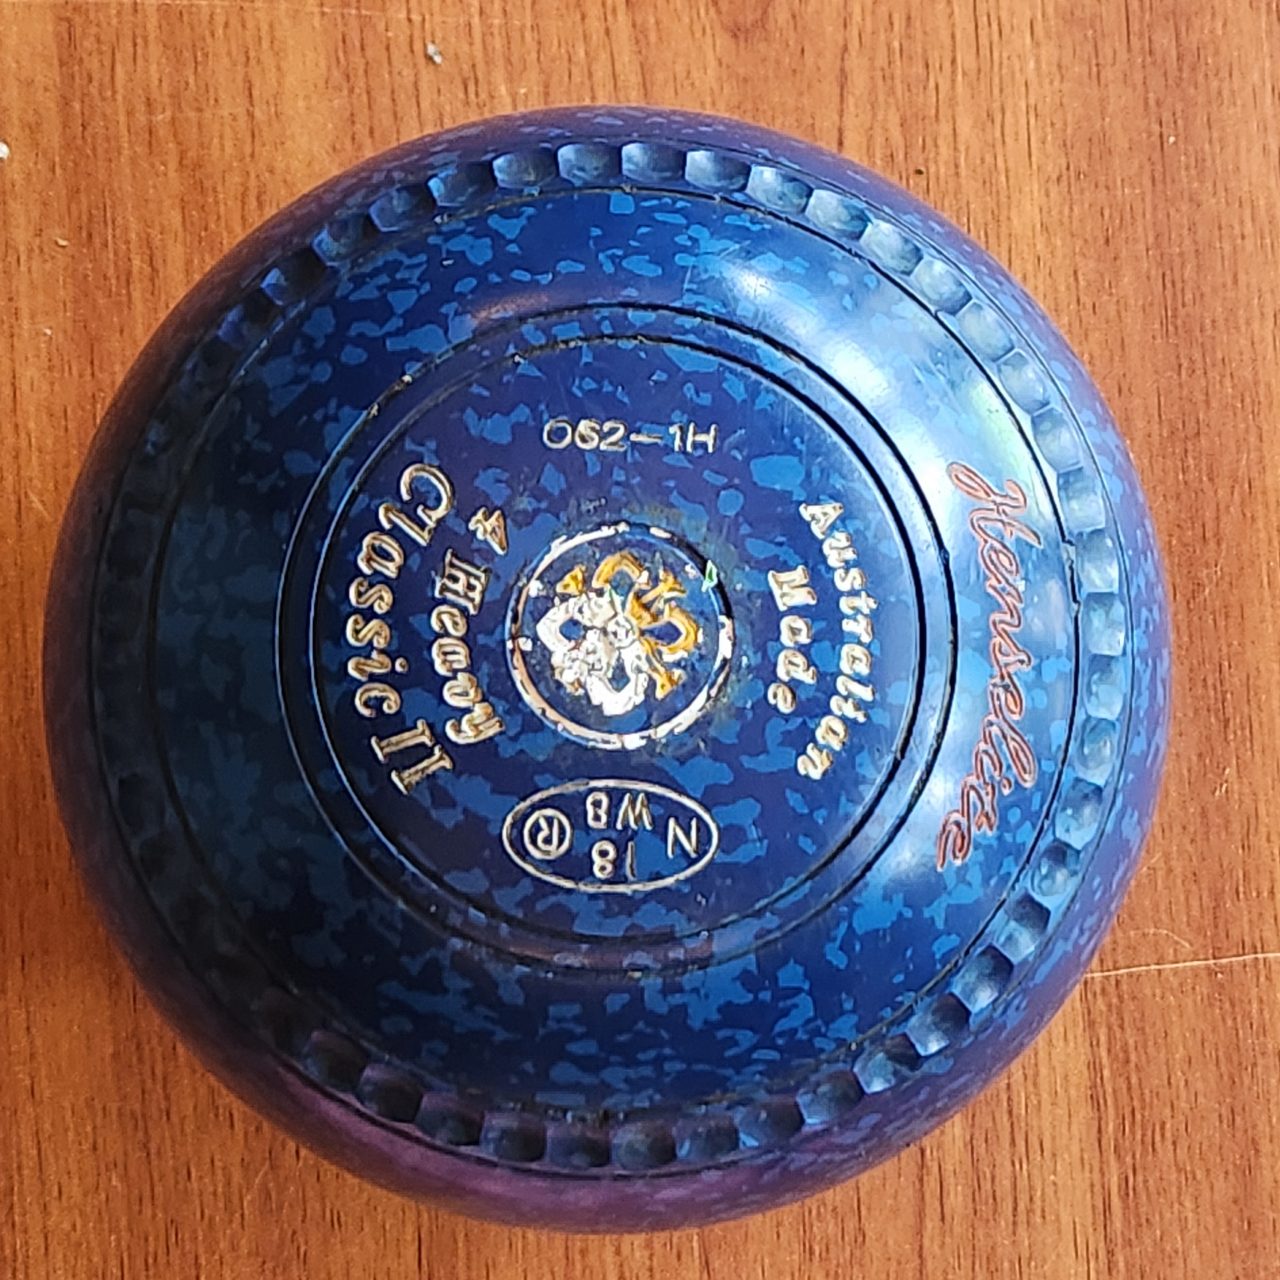 Bowls for Sales Classic II 4H (Issued on 16/7/24)